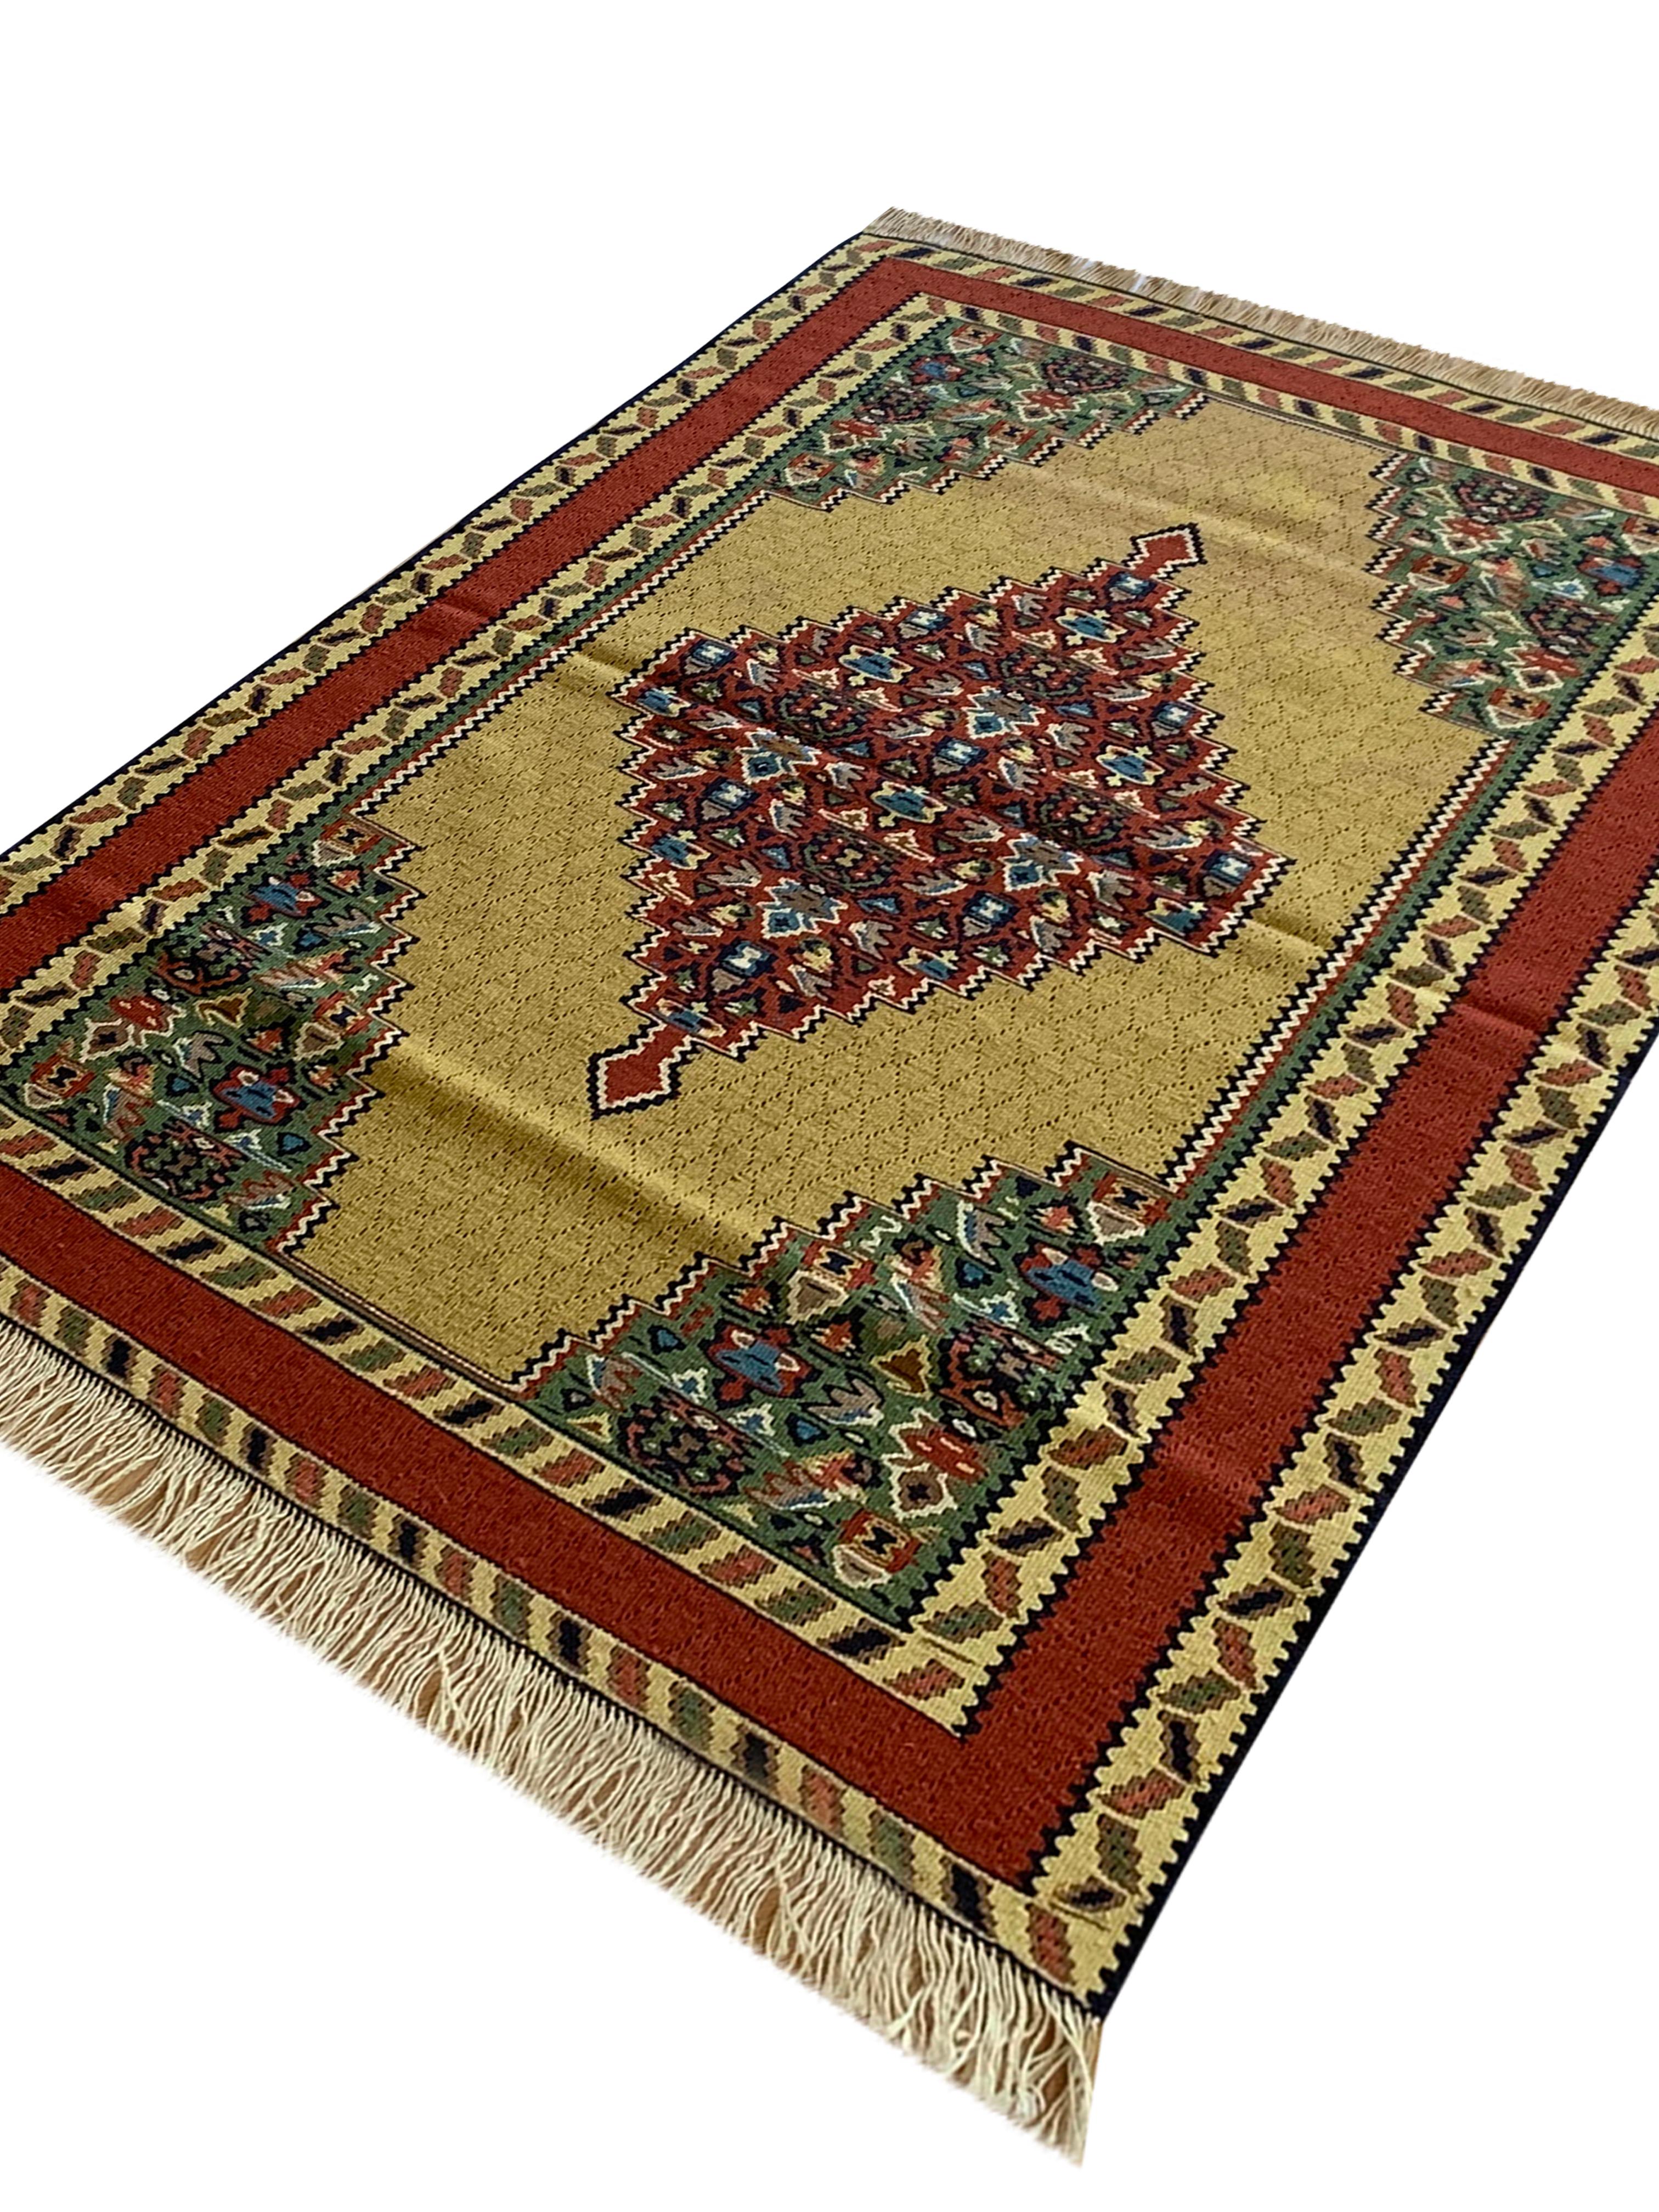 Pair of Small Kilim Rugs Handwoven Oriental Geometric Area Rugs In New Condition For Sale In Hampshire, GB